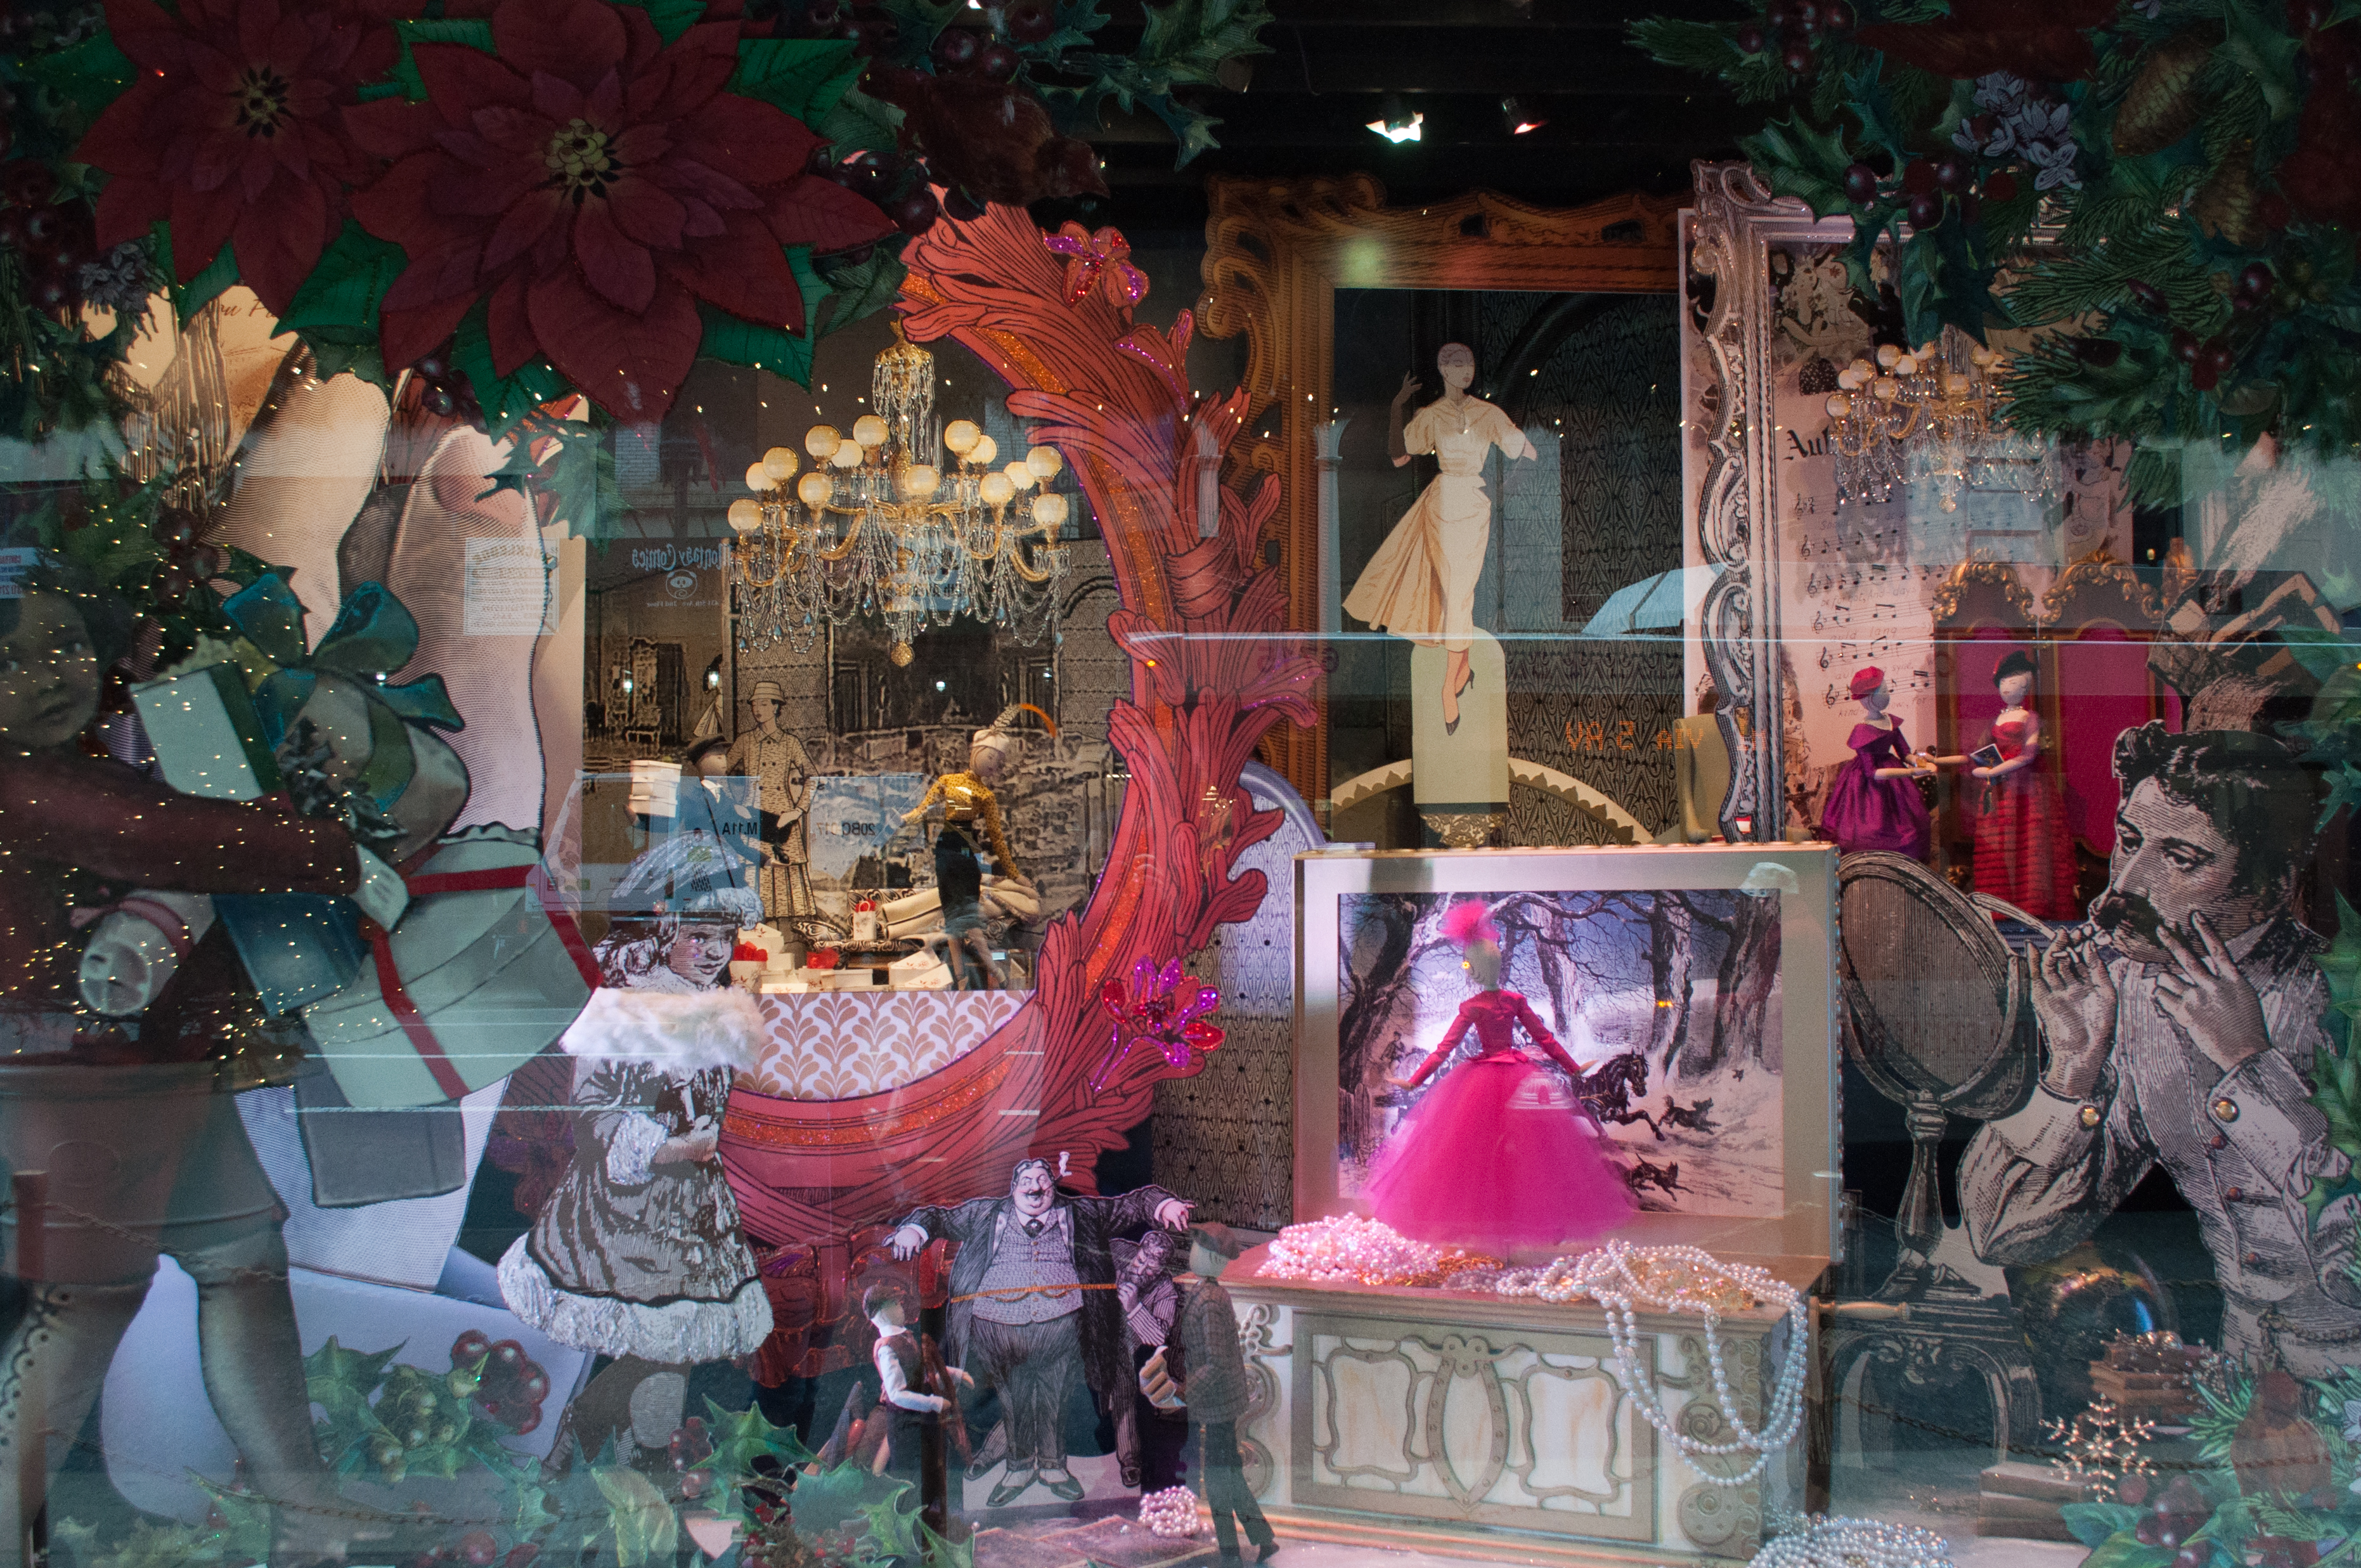 Lord and Taylor Holiday Window Illustrations